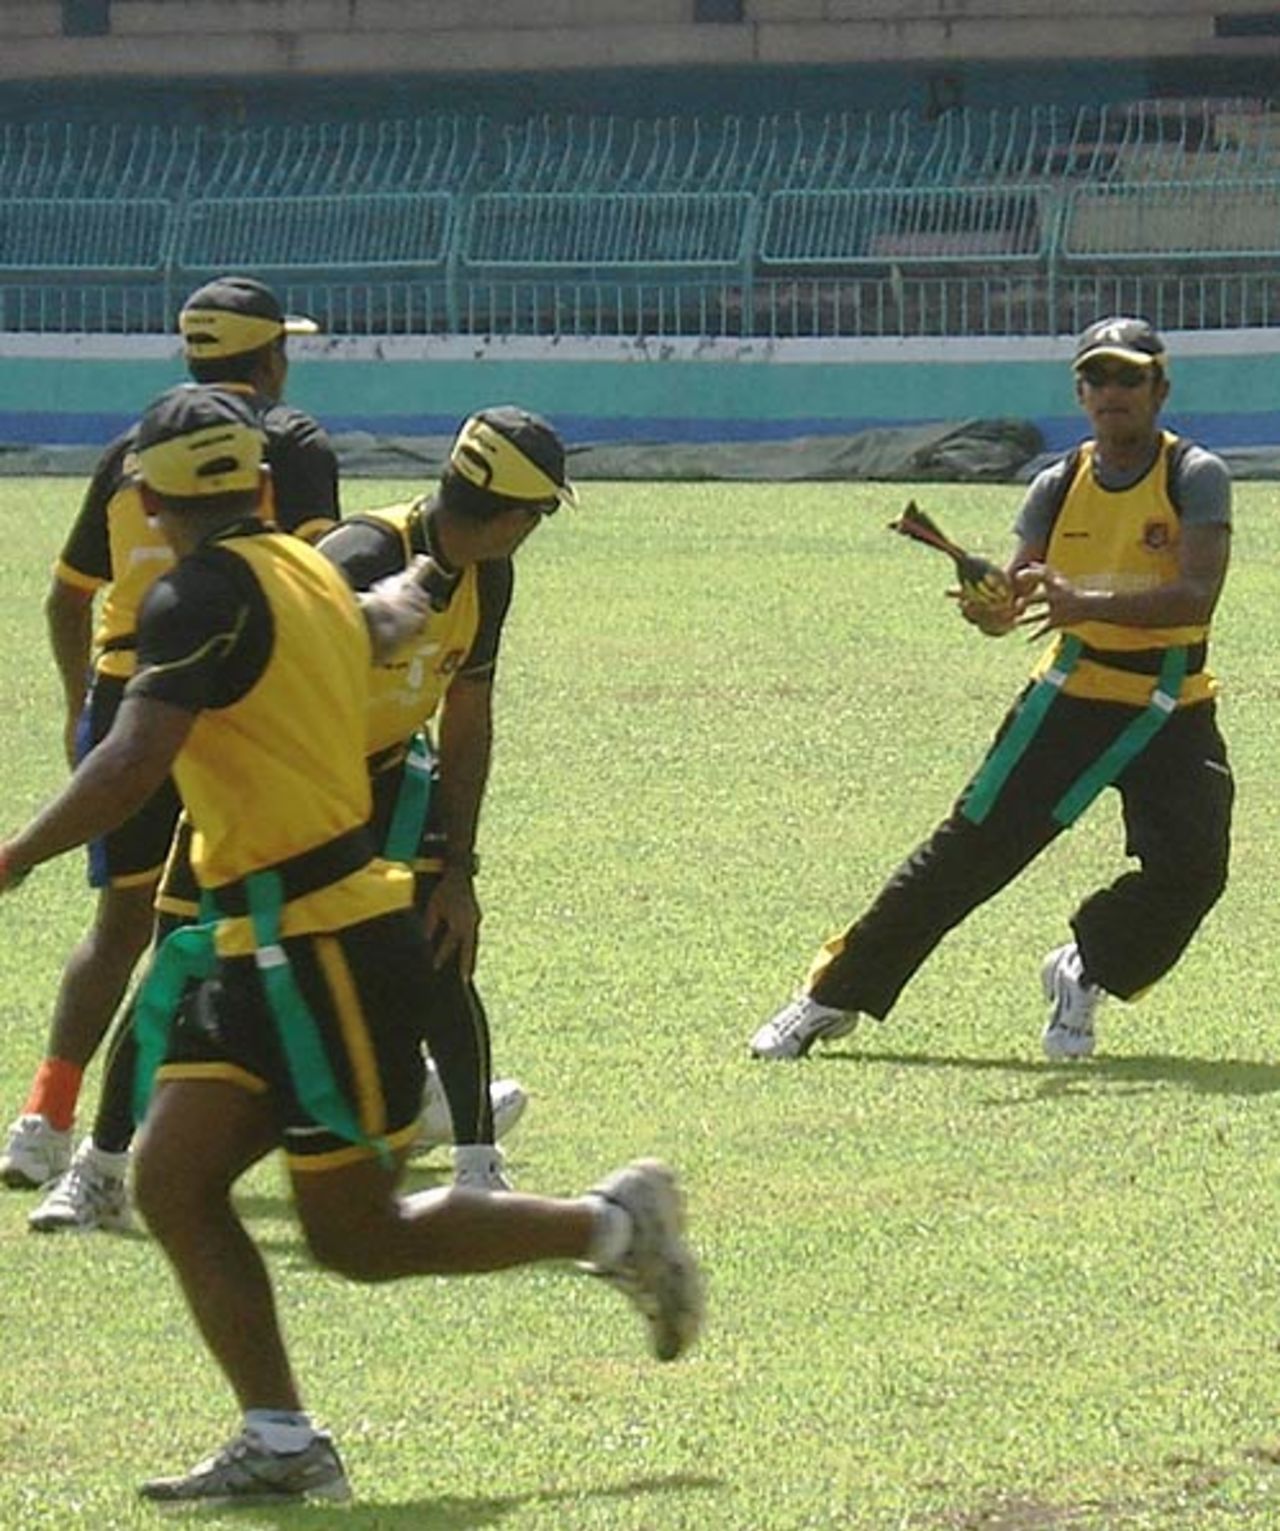 Mehrab Hossain jnr gets into a position to throw down the vortex to complete a touchdown, Colombo, June 30, 2007